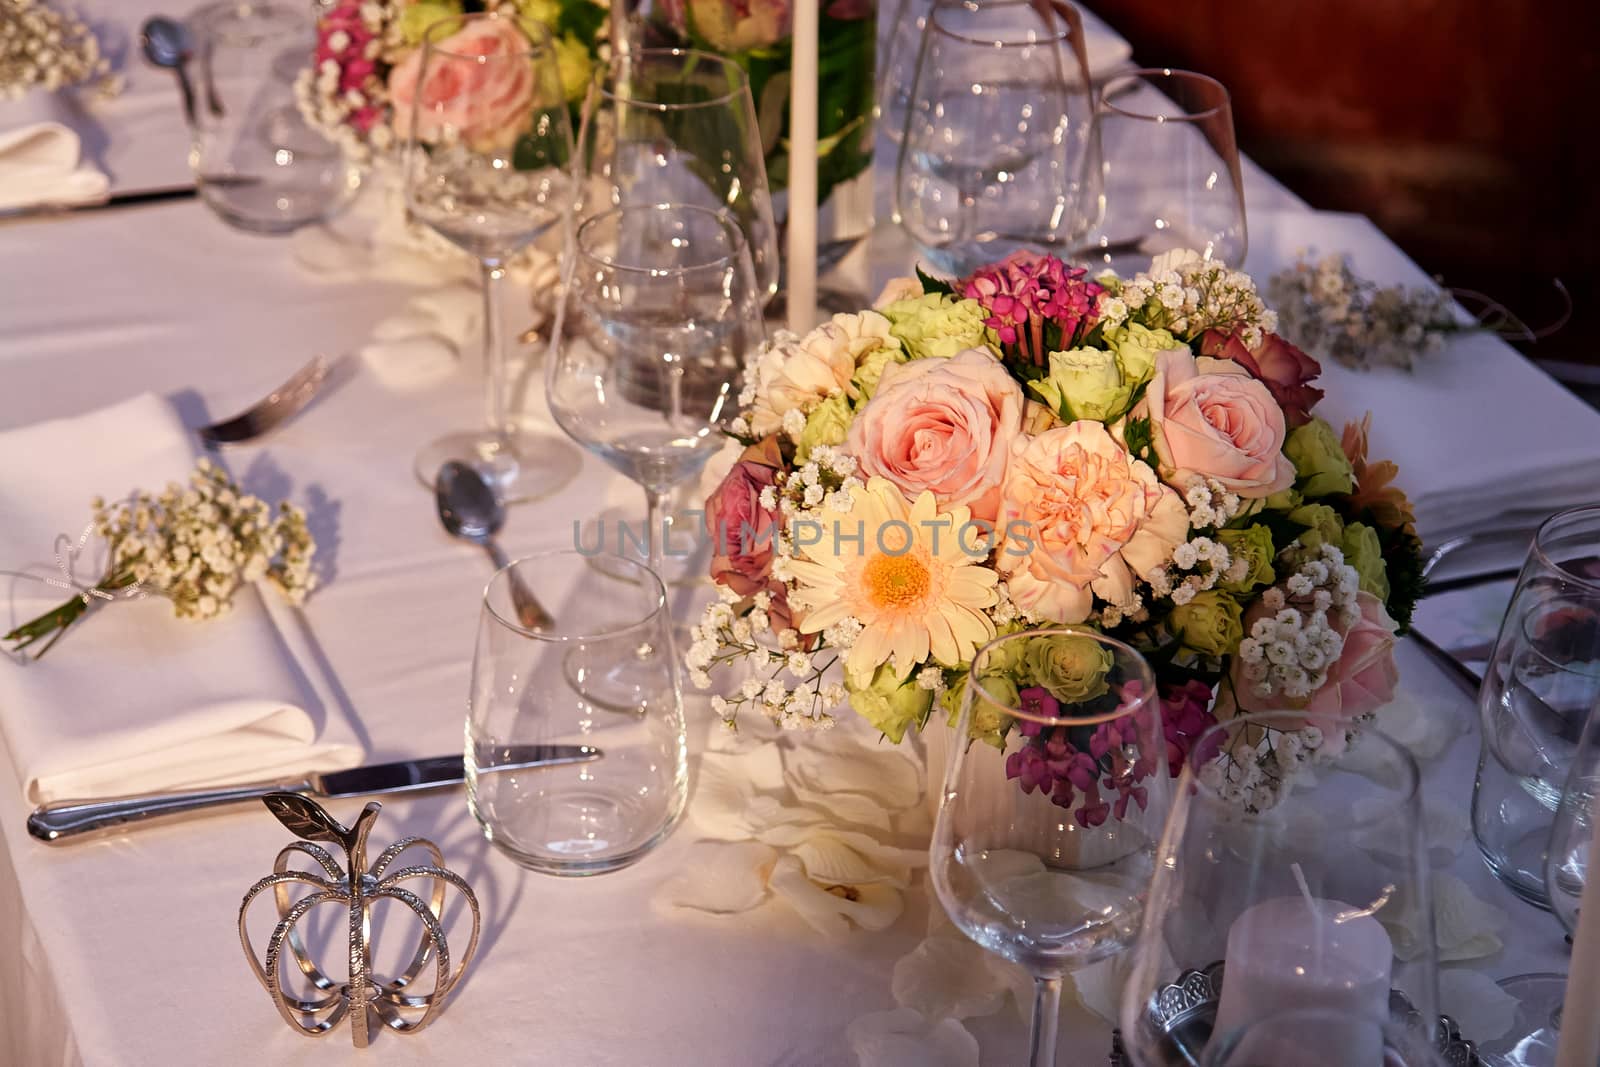 Festive wedding table setting with flowers, napkins, silver cutlery, glasses and candles                       